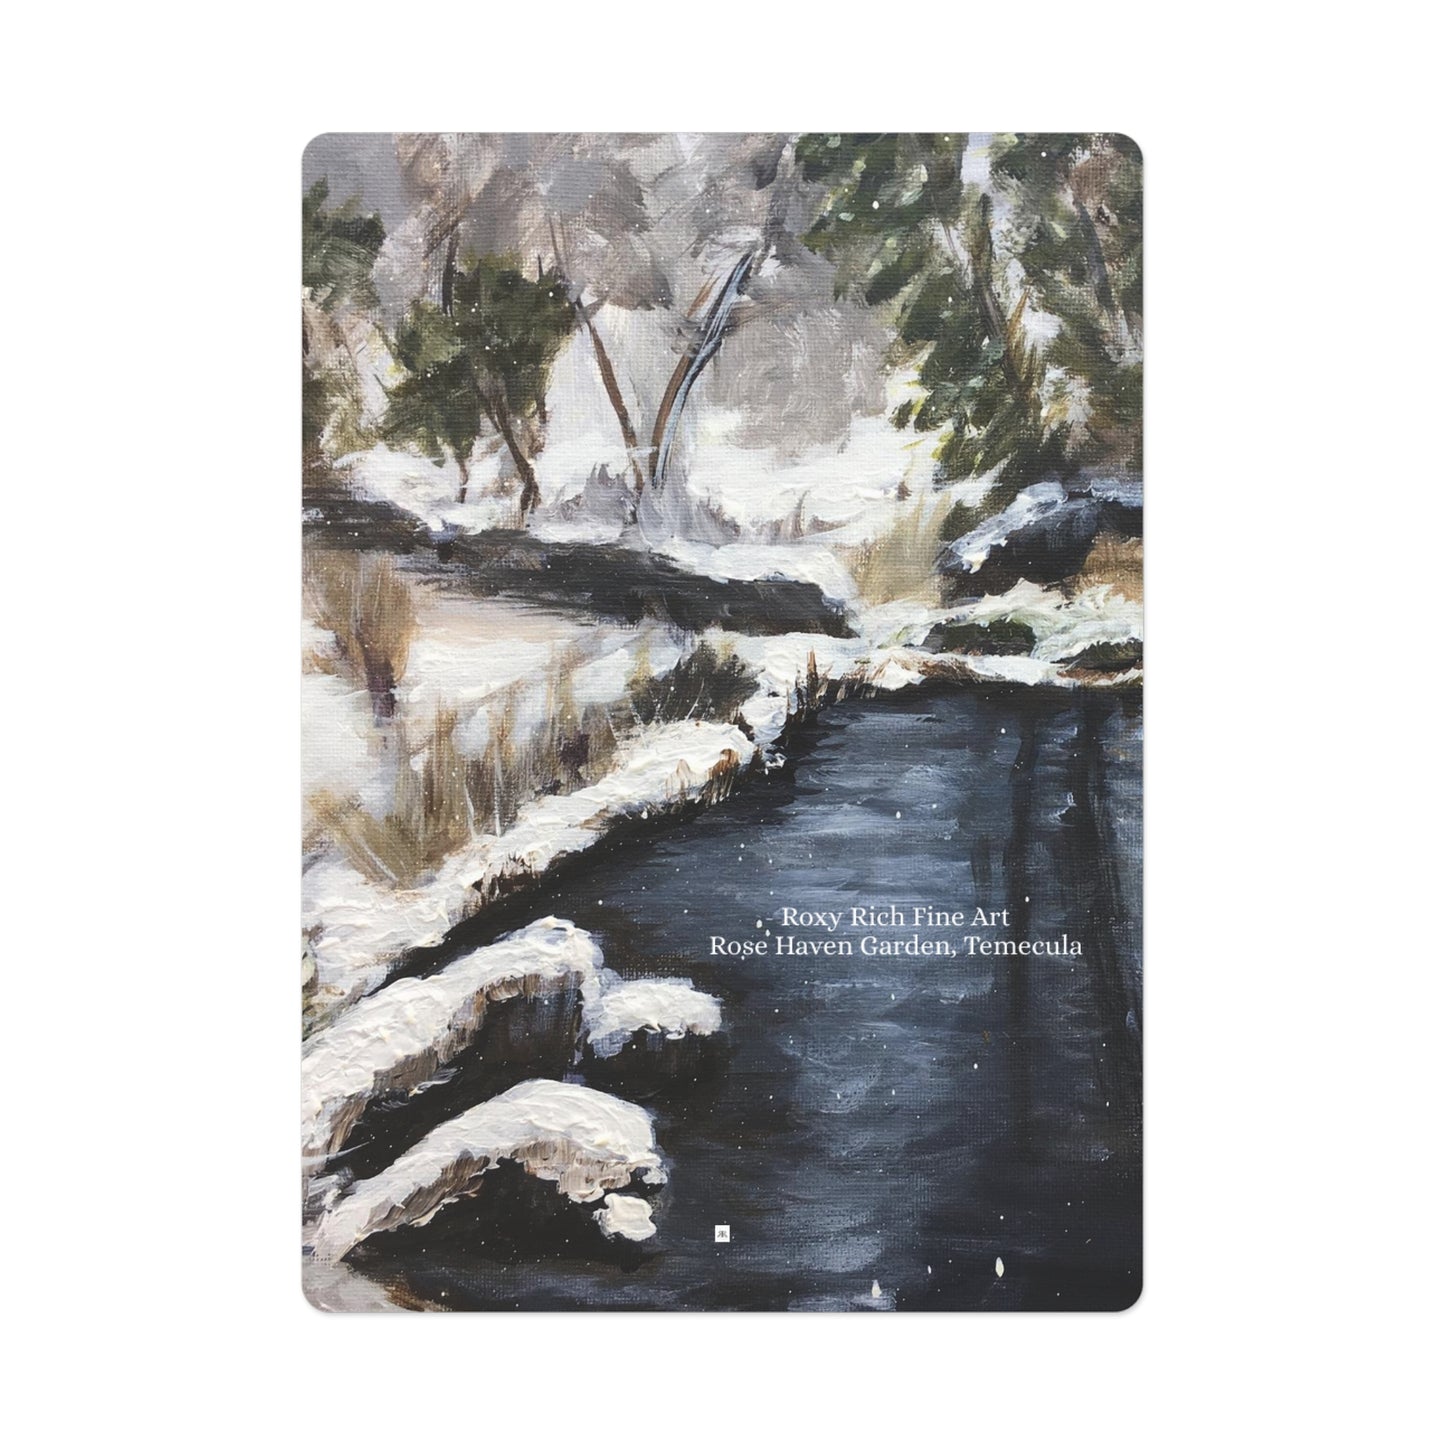 Rose Haven Garden, Temecula (rare snow day) Poker Cards/Playing Cards